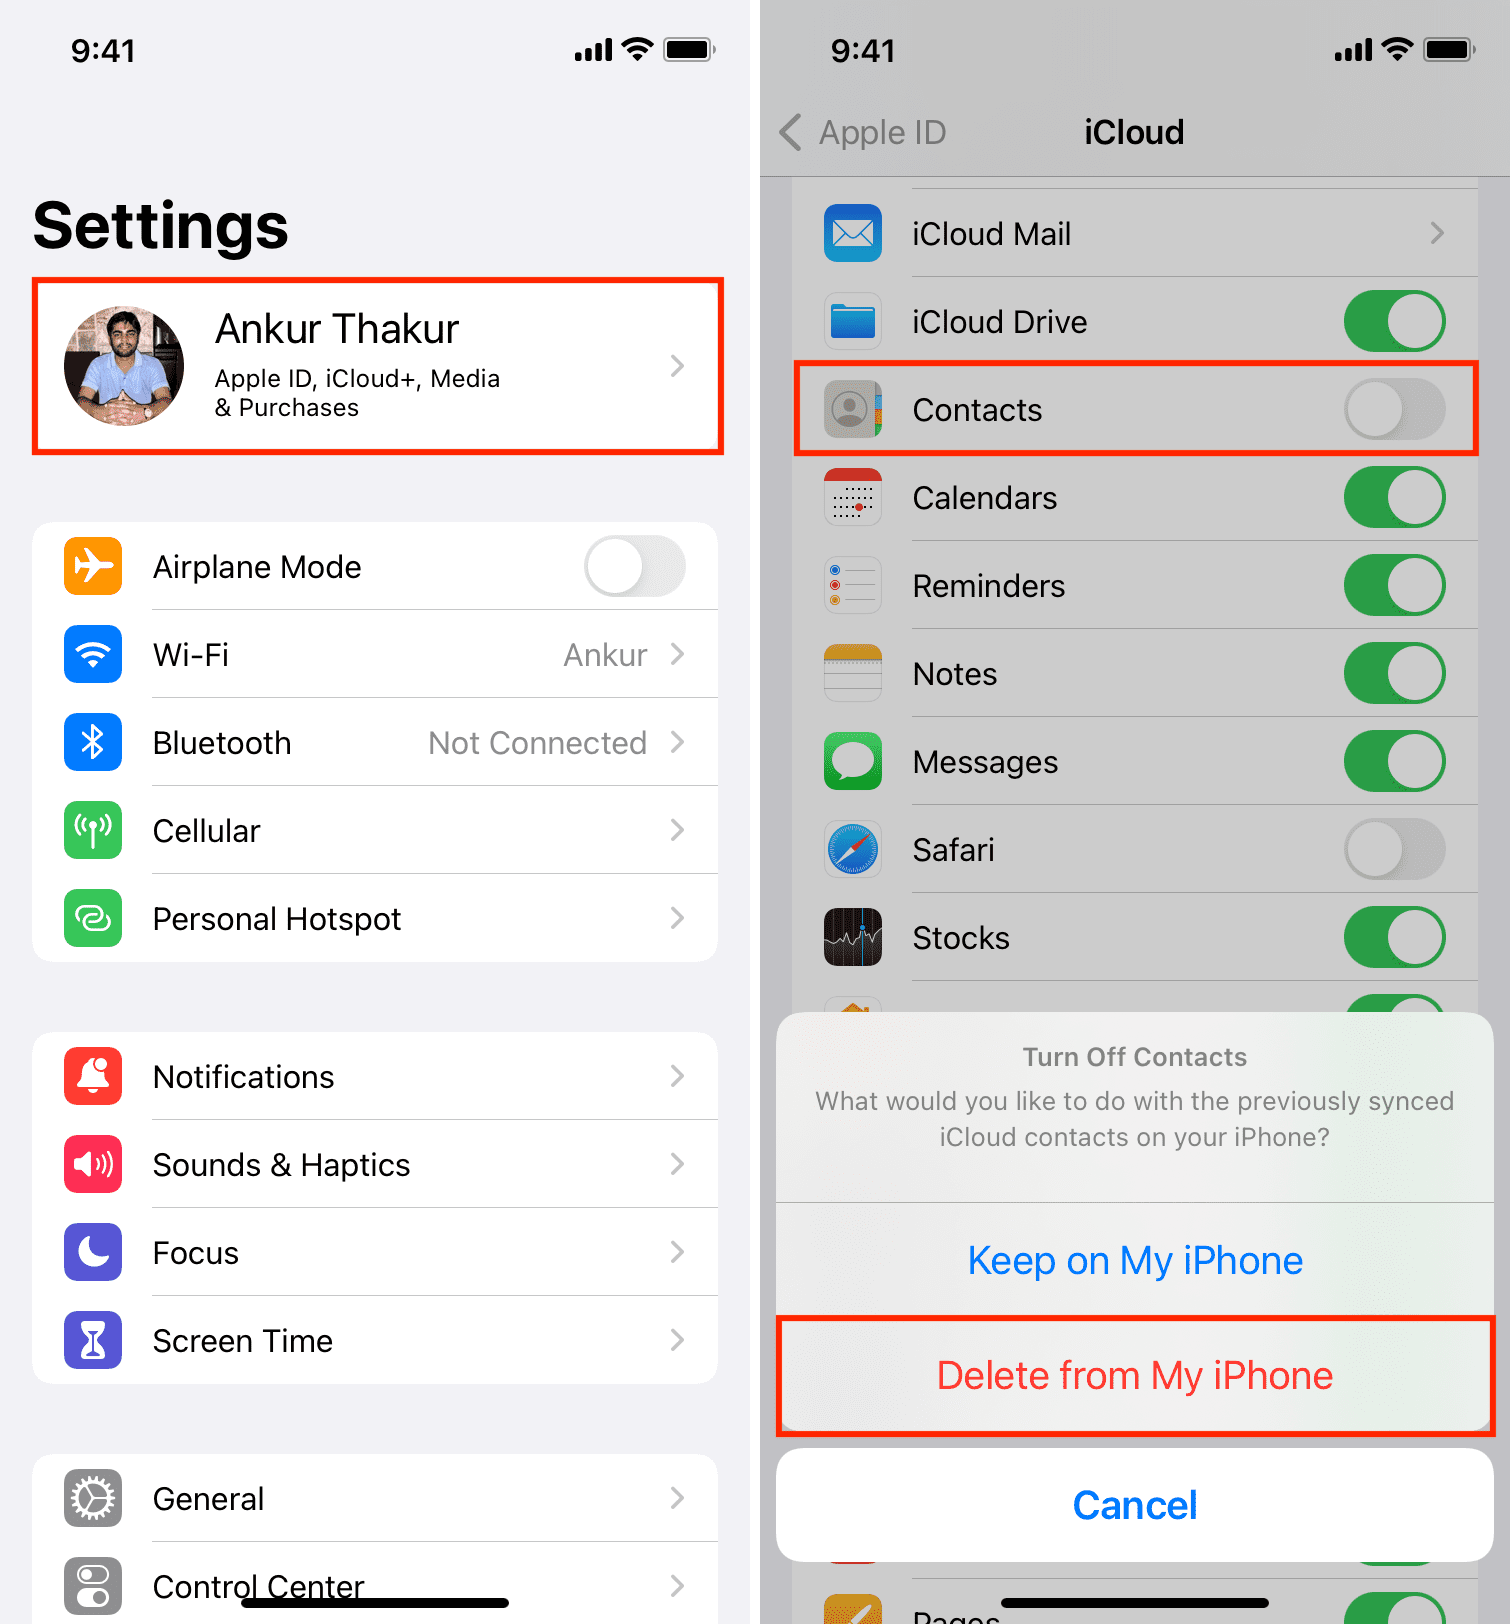 Delete from My iPhone in iCloud Contacts on iPhone